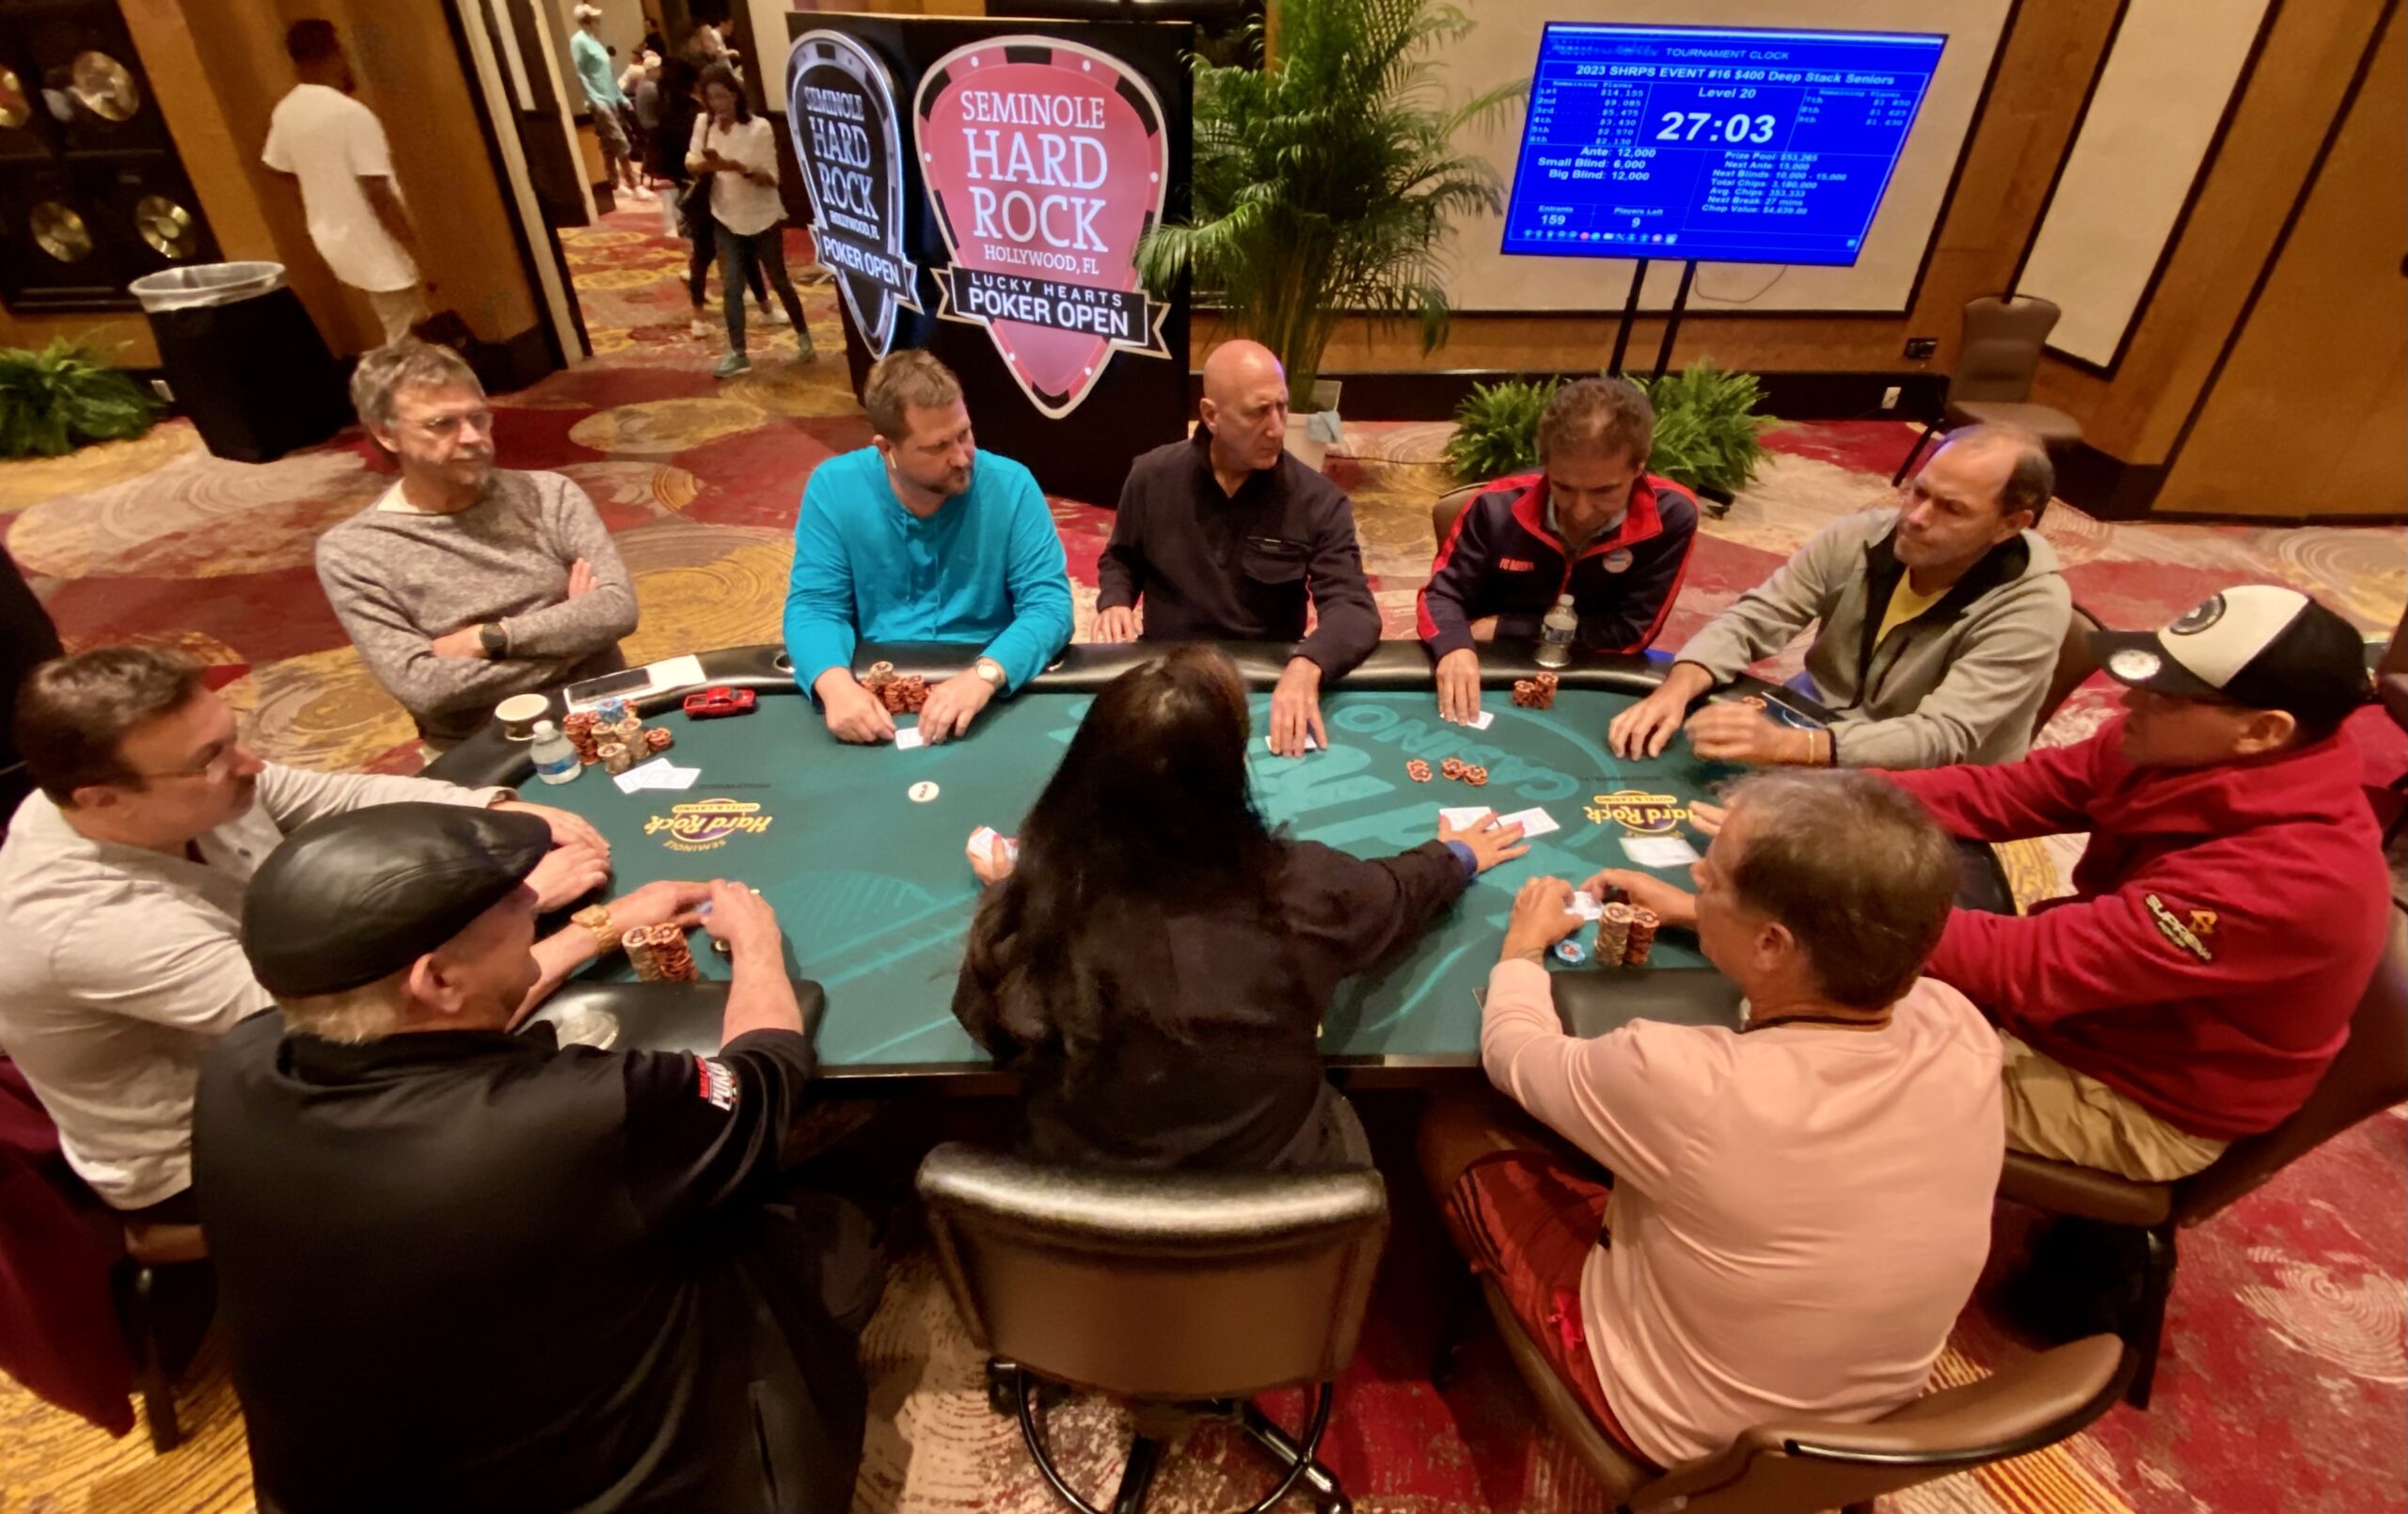 Event 16 Final Table